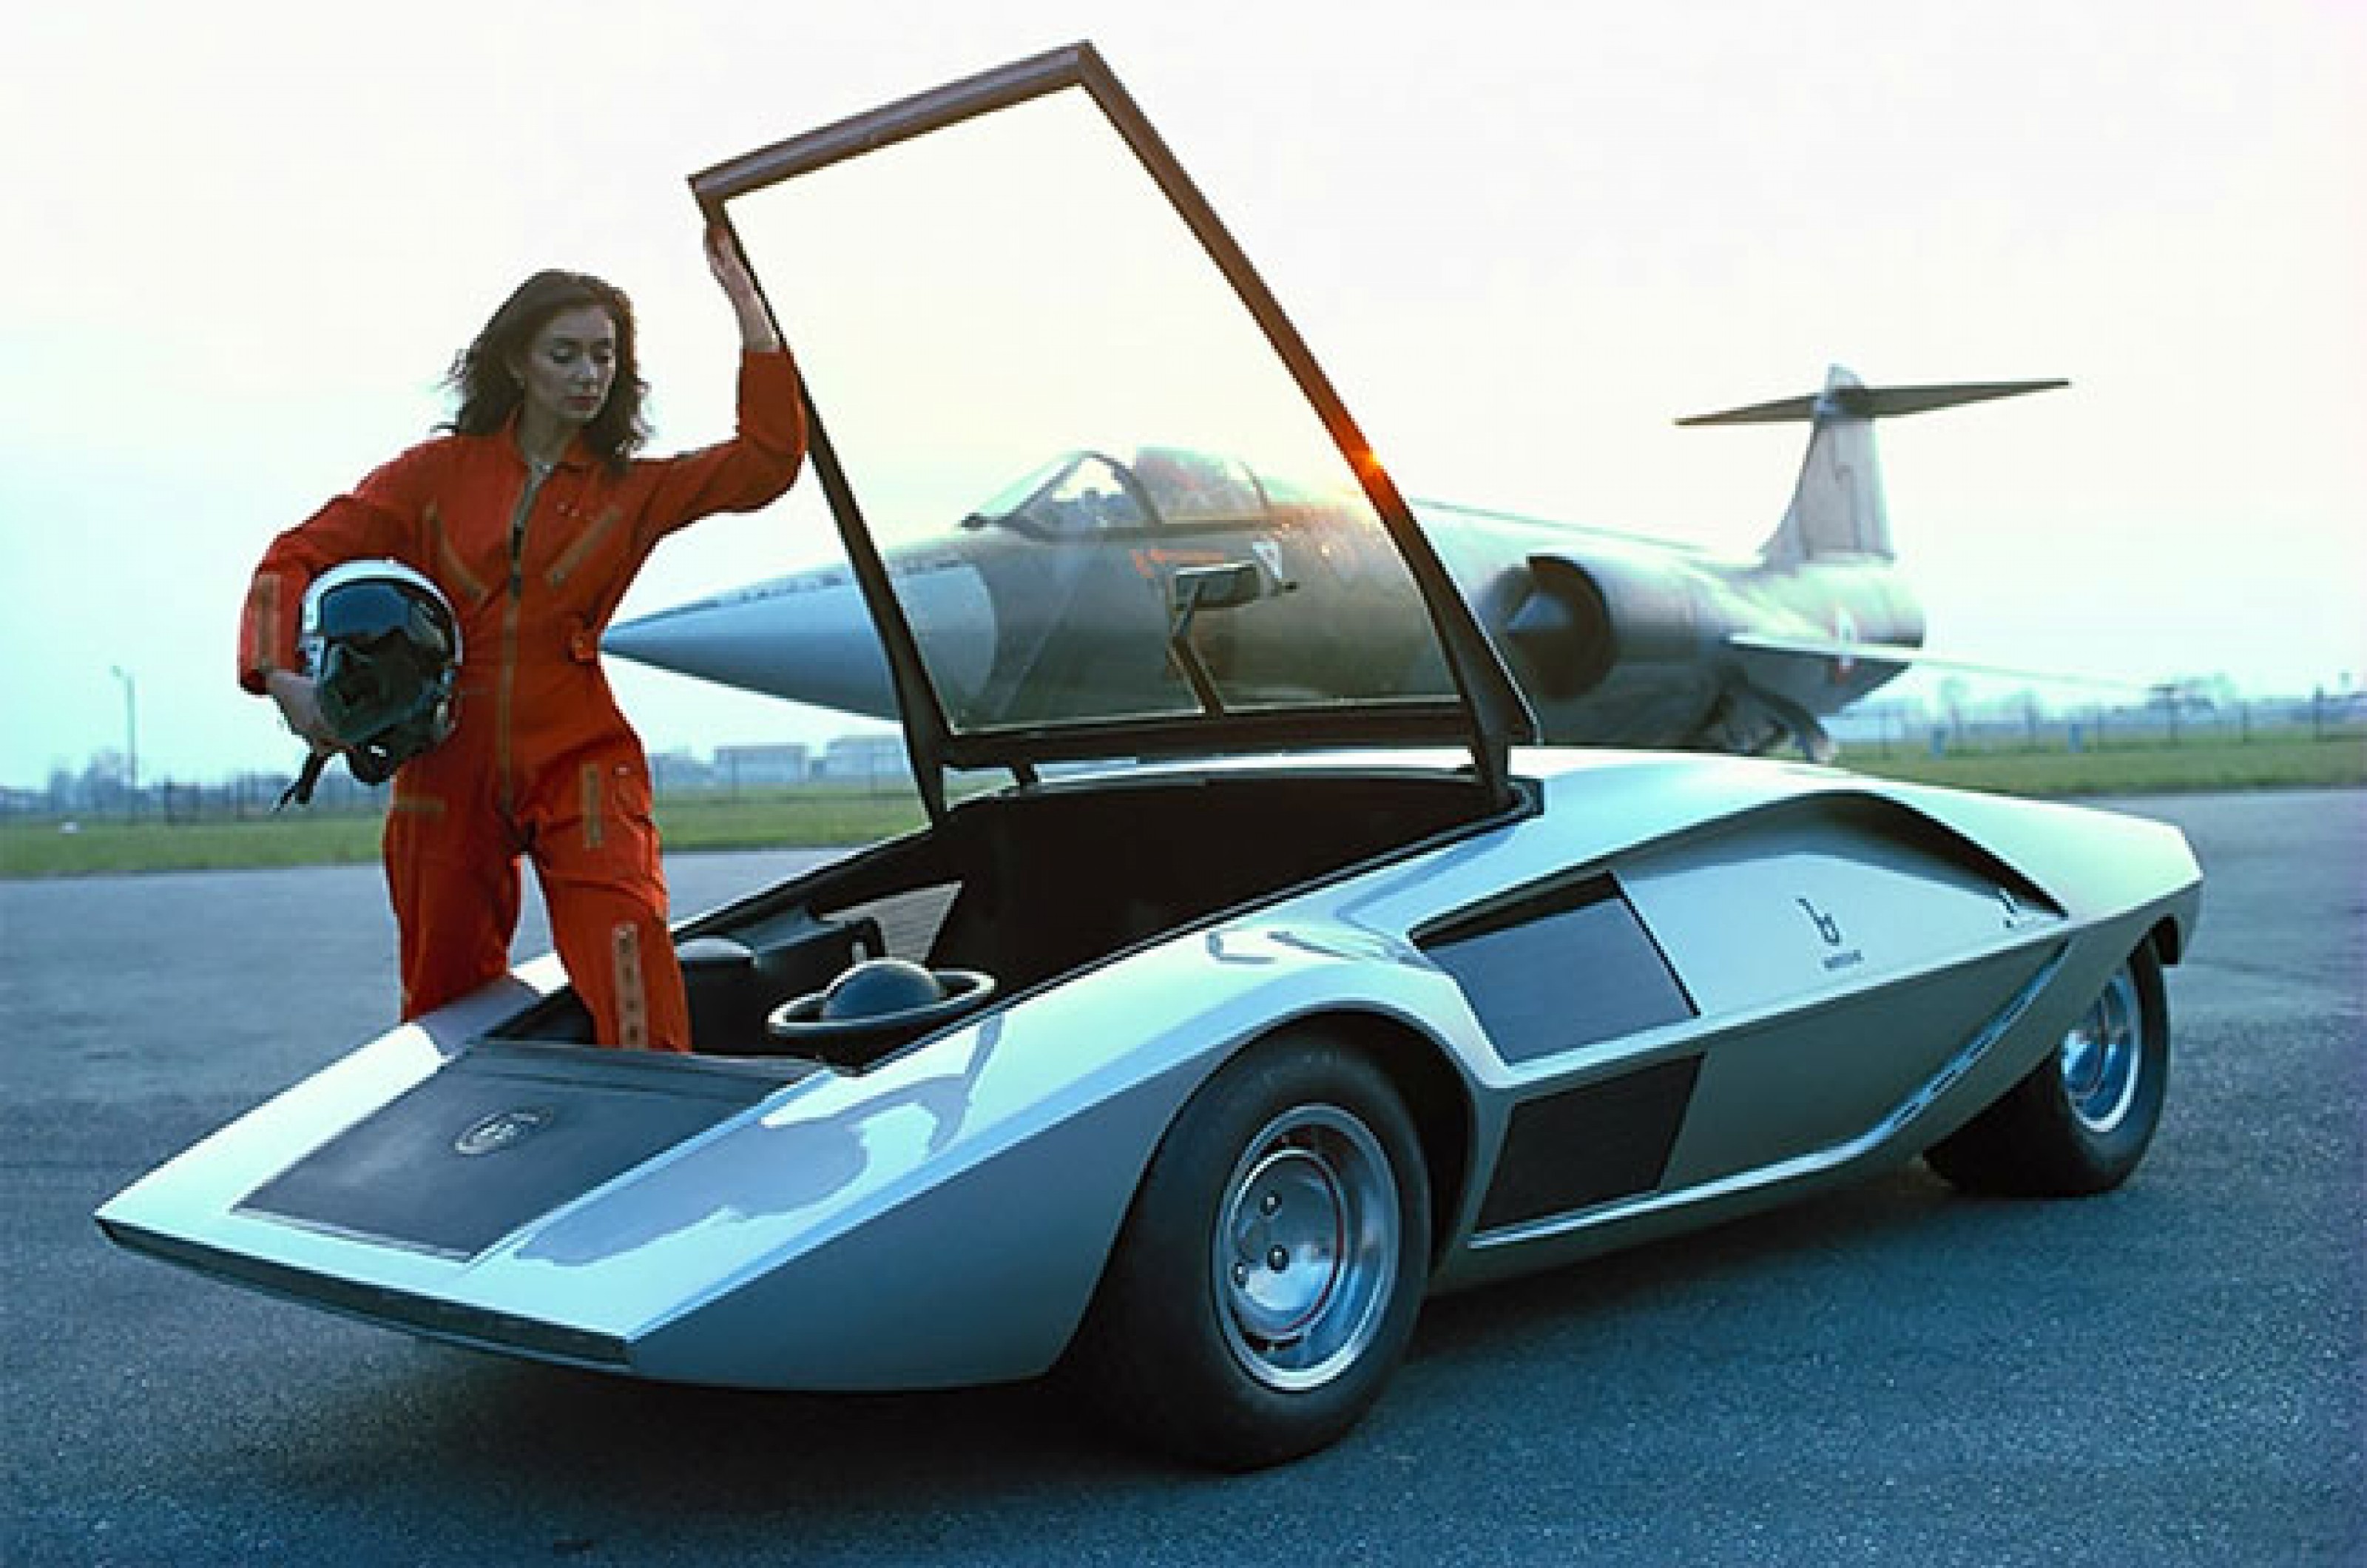 <p>Lancia’s Stratos Zero concept is a combination of a door and windshield redesign.</p>  <p>There are classic cars aplenty where the windshield pops out slightly to act as an additional form of ventilation, but usually if it protrudes to this extent, something has gone horribly wrong.</p>  <p>However, the Stratos Zero’s windshield was intended to be utilized as the access point to the two seats. In fact, conventional doors would have been an impossibility for this car.</p>  <p>Clearly not willing to be constrained by traditional automotive construction, Marcello Gandini embraced the wedge shape and built a car around it.</p>  <p>As is true of several of these quirky door designs, they capture moments in time when safety and practicality weren’t necessarily paramount.</p>